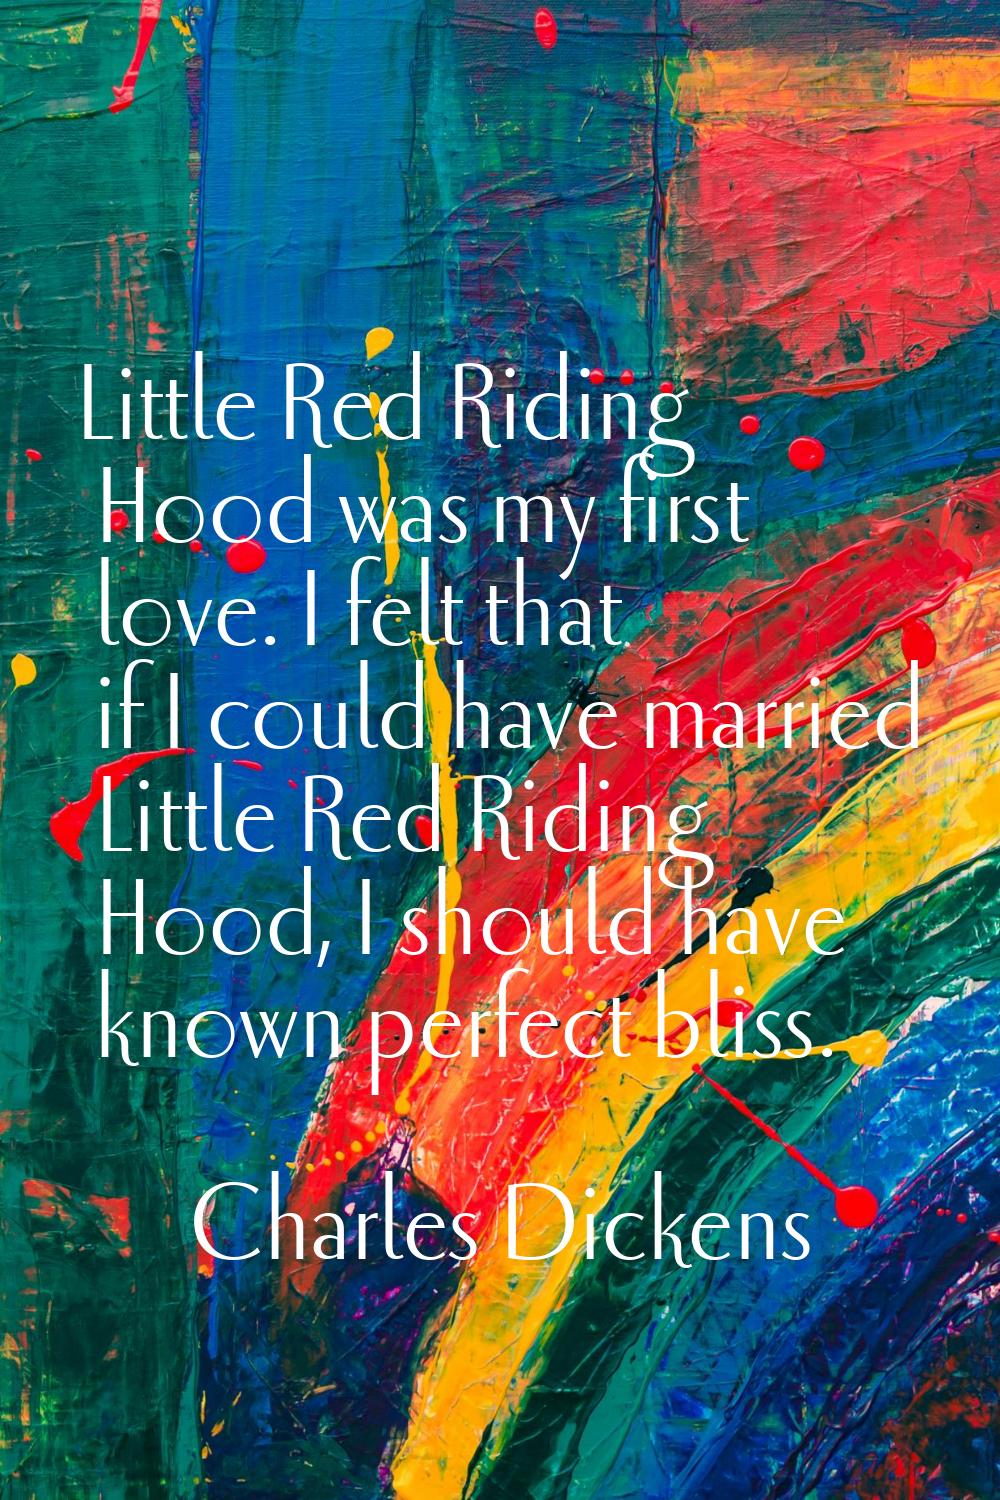 Little Red Riding Hood was my first love. I felt that if I could have married Little Red Riding Hoo